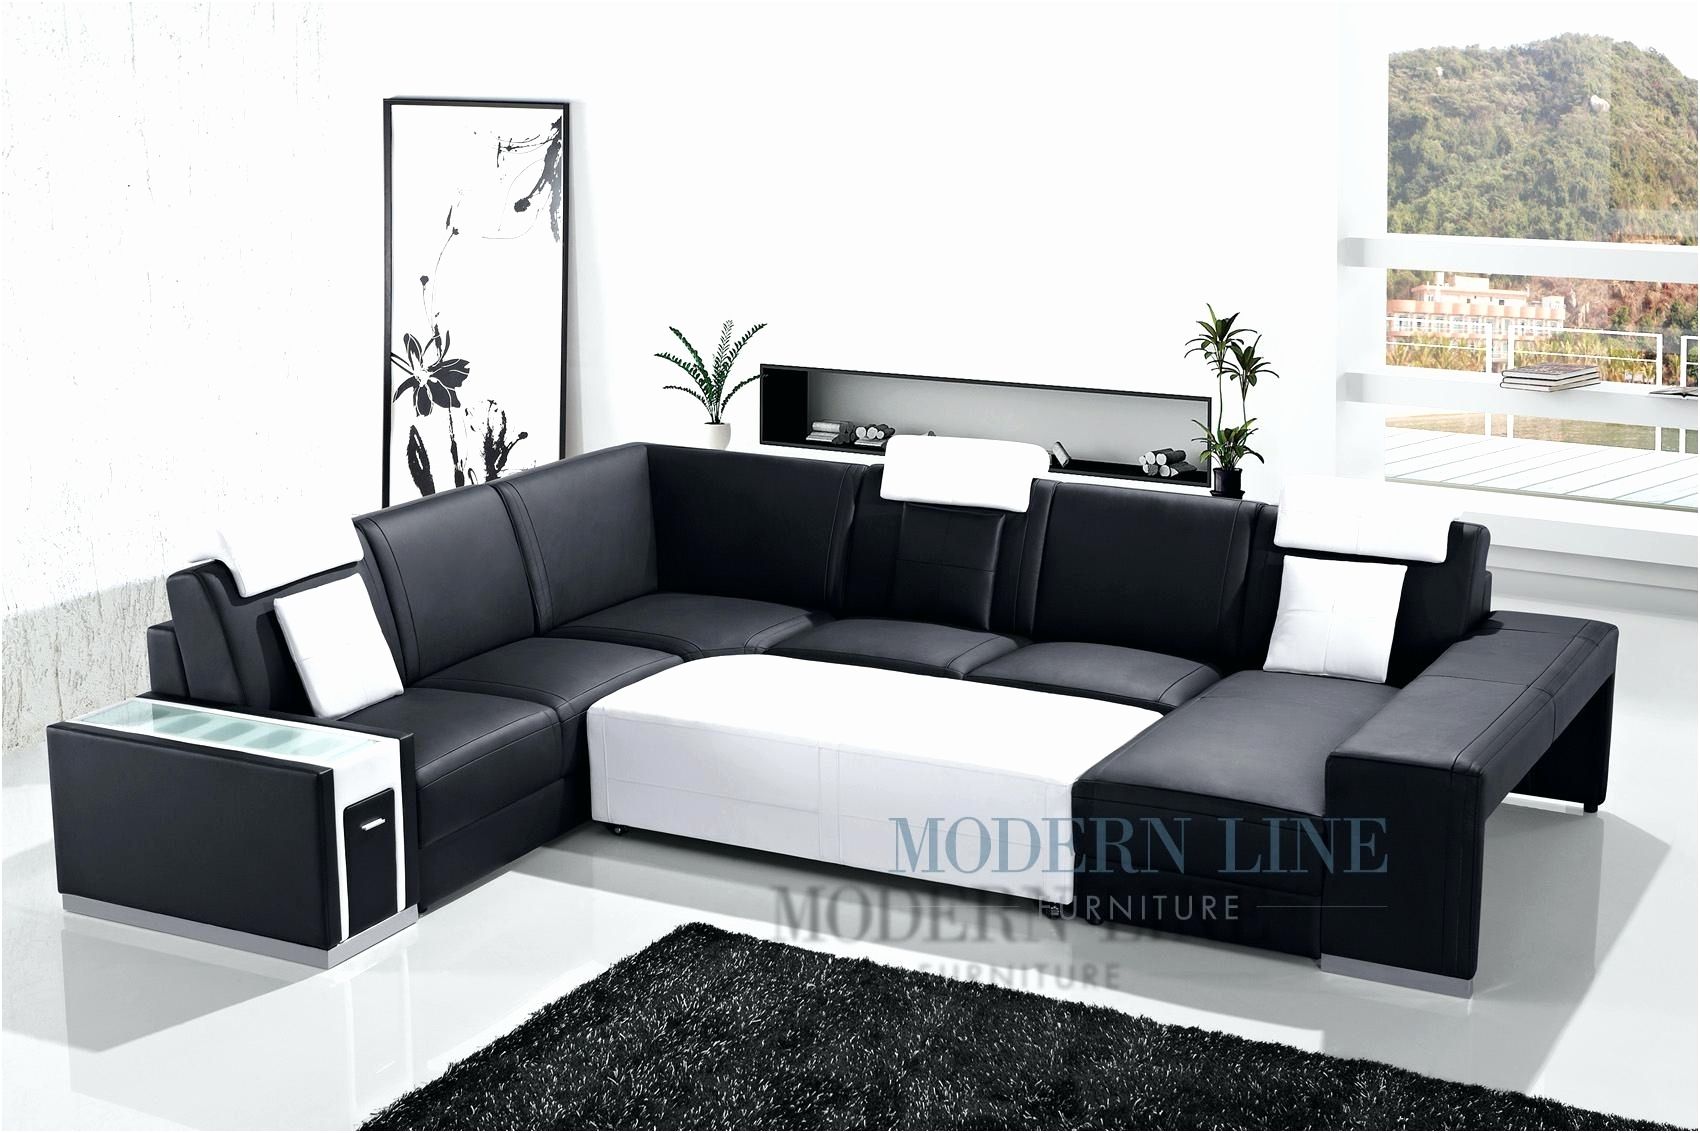 Lovely Custom Sectional Sofas Elegant – Intuisiblog Intended For Couches With Large Ottoman (View 14 of 15)